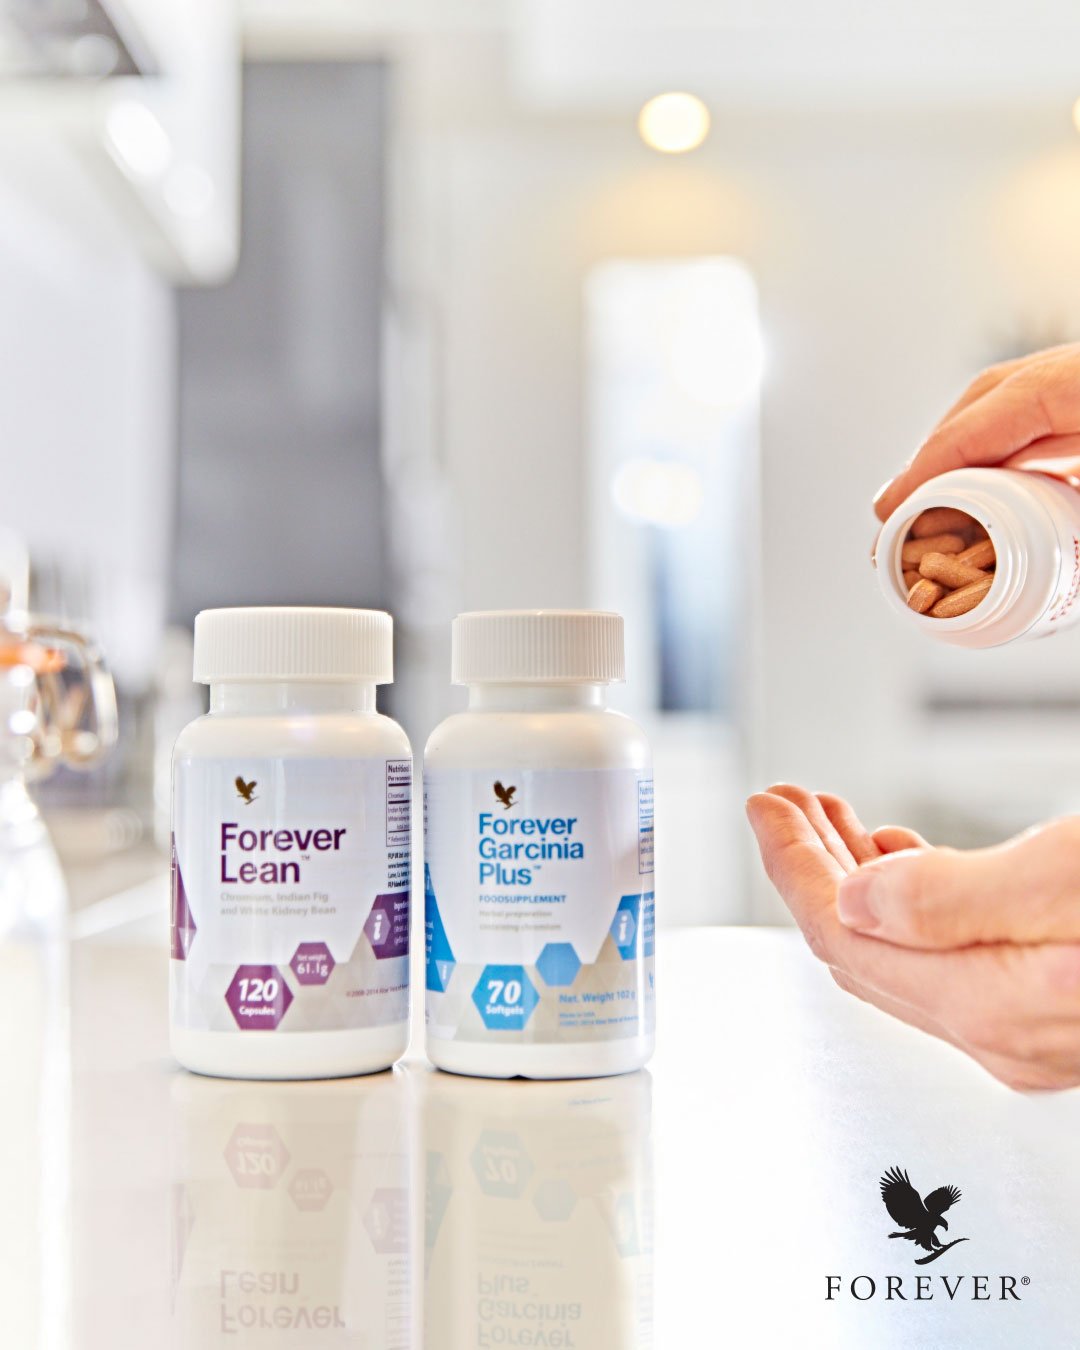 Forever Living on Twitter: "Forever Lean® and Forever Garcinia Plus®  contain revolutionary ingredients to help you succeed in reaching your  ideal weight. Visit https://t.co/ZPYjHcJi6A to learn more about these  amazing supplements! #LookBetterFeelBetter